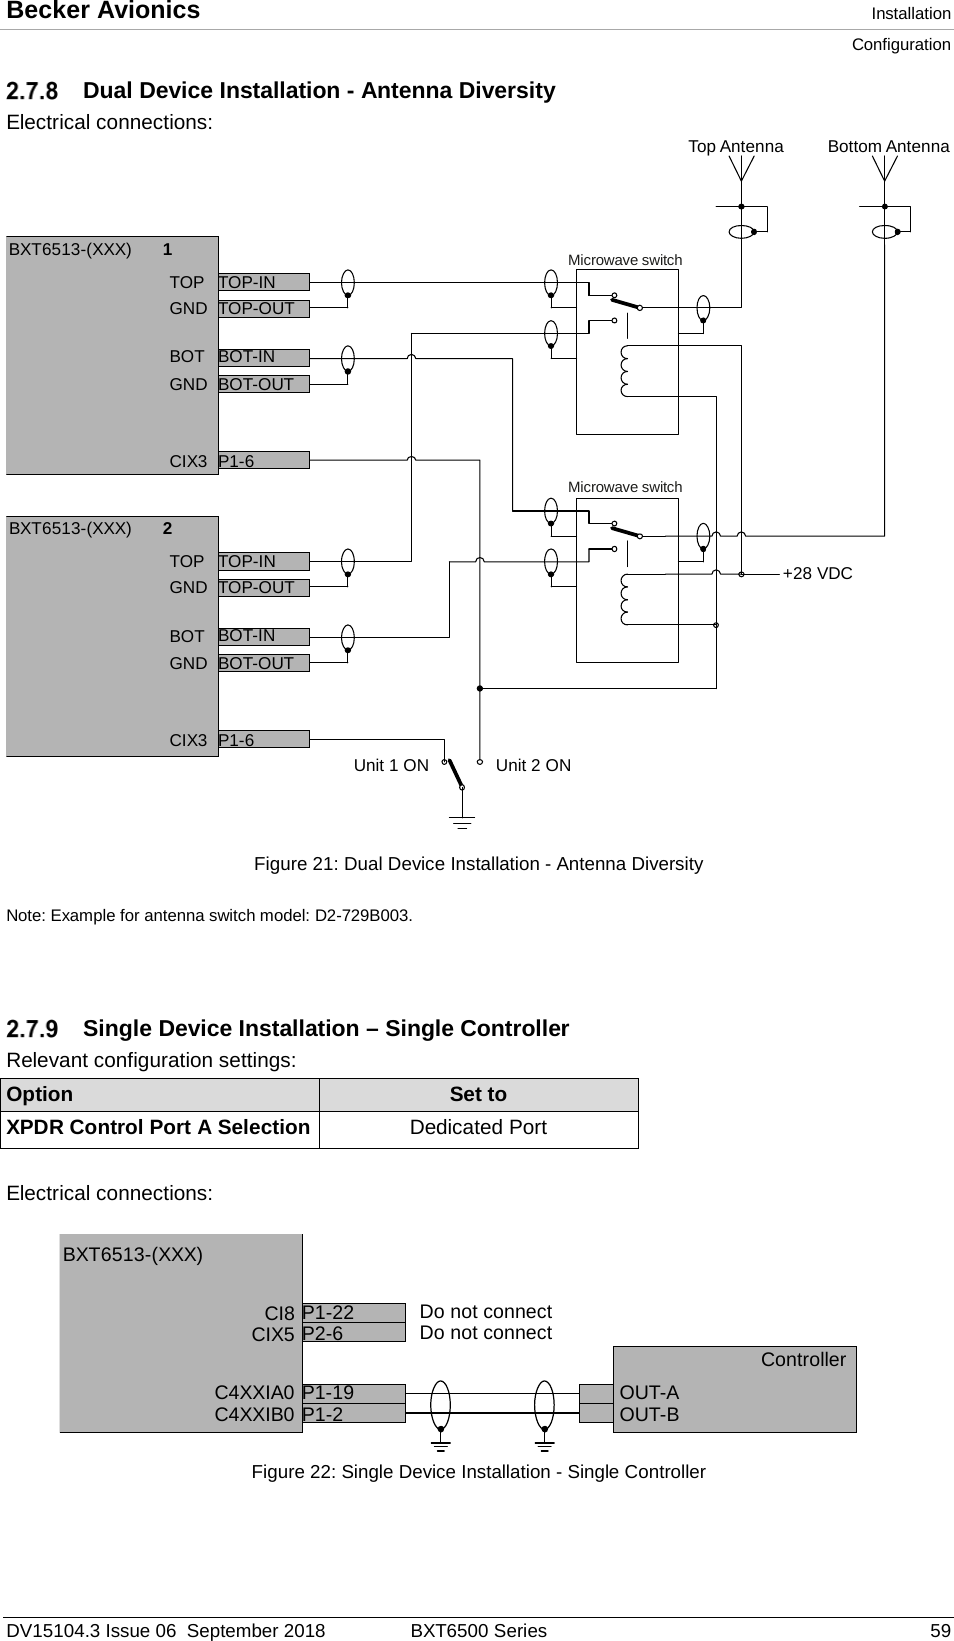 Becker Avionics  Installation Configuration  DV15104.3 Issue 06  September 2018 BXT6500 Series 59  Dual Device Installation - Antenna Diversity Electrical connections:  Figure 21: Dual Device Installation - Antenna Diversity  Note: Example for antenna switch model: D2-729B003.     Single Device Installation – Single Controller Relevant configuration settings: Option Set to XPDR Control Port A Selection Dedicated Port   Electrical connections:  Figure 22: Single Device Installation - Single Controller   TOPGNDBOTGNDTOP-INTOP-OUTBOT-INBOT-OUTCIX3 P1-6Top AntennaMicrowave switchMicrowave switchUnit 1 ON Unit 2 ONBottom Antenna+28 VDCBXT6513-(XXX) 1TOPGNDBOTGNDTOP-INTOP-OUTBOT-INBOT-OUTCIX3 P1-6BXT6513-(XXX) 2CI8CIX5C4XXIA0C4XXIB0 P1-19P1-2P1-22P2-6OUT-AOUT-BBXT6513-(XXX)ControllerDo not connectDo not connect